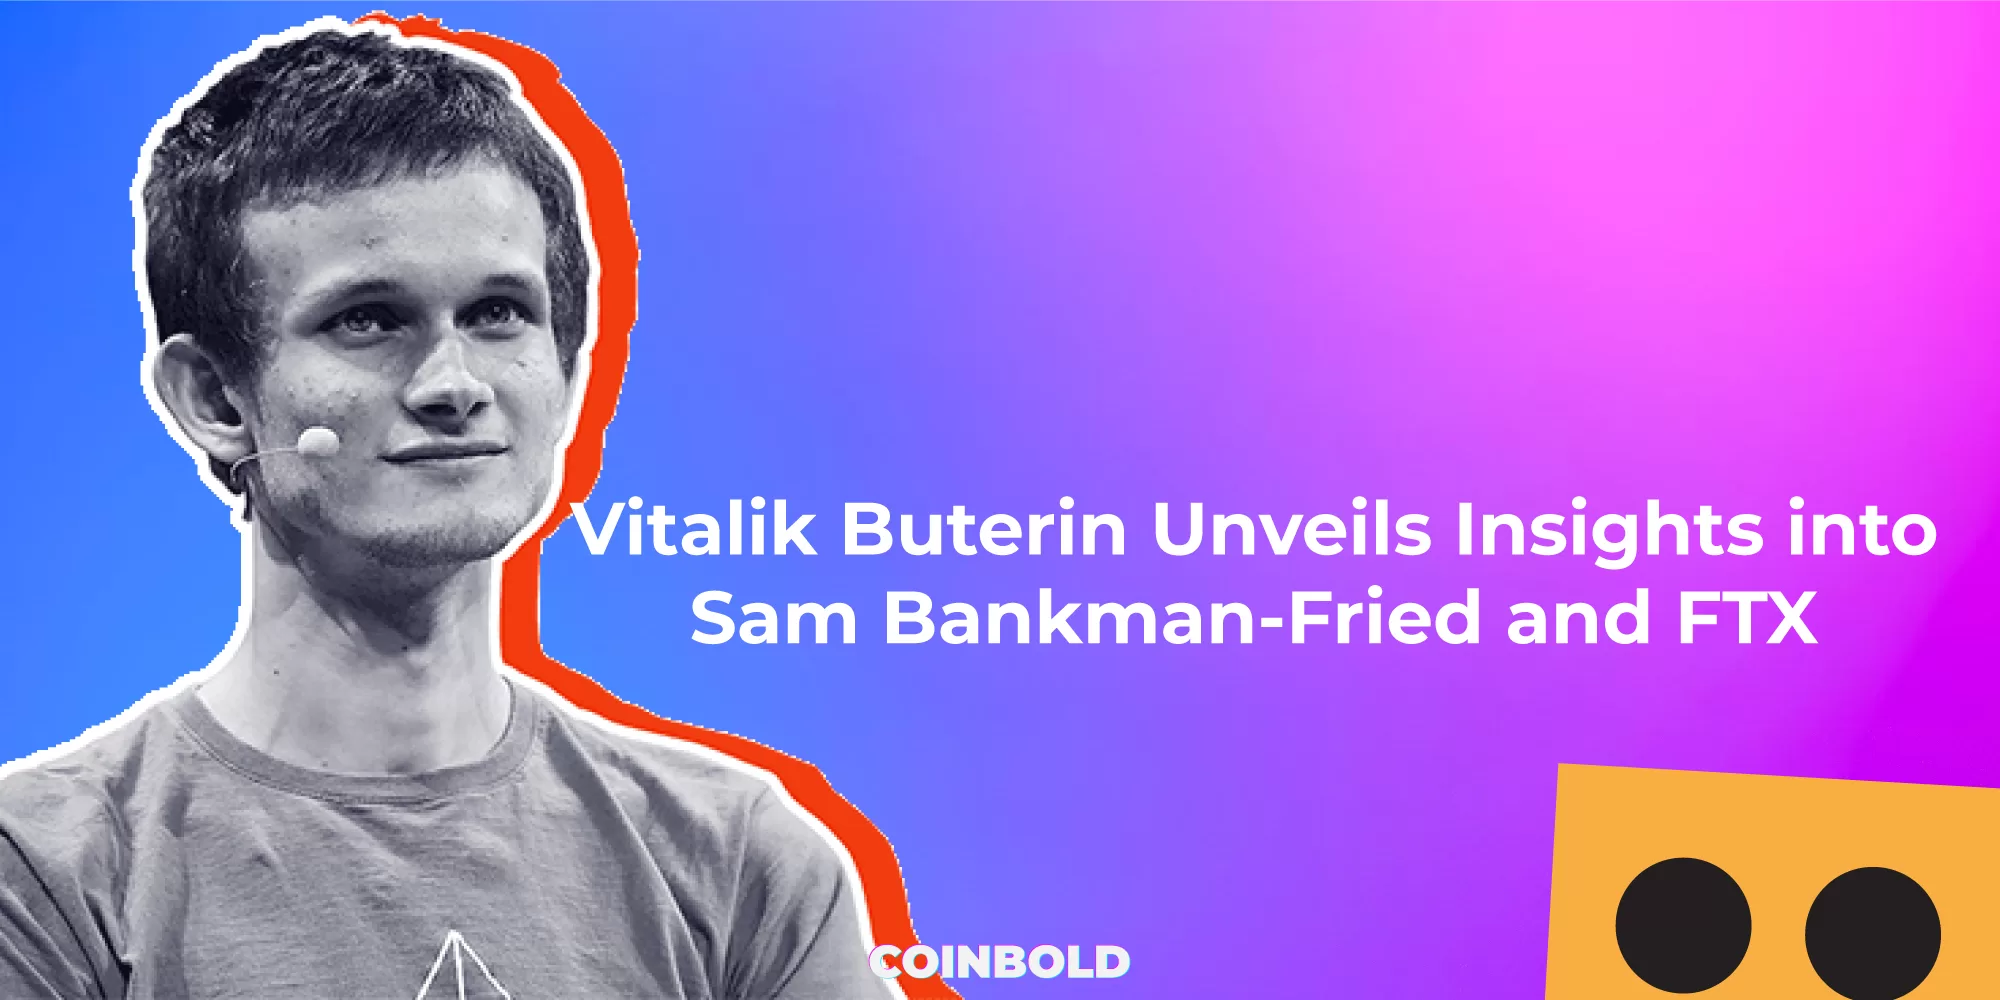 Vitalik Buterin Unveils Insights into Sam Bankman Fried and FTX